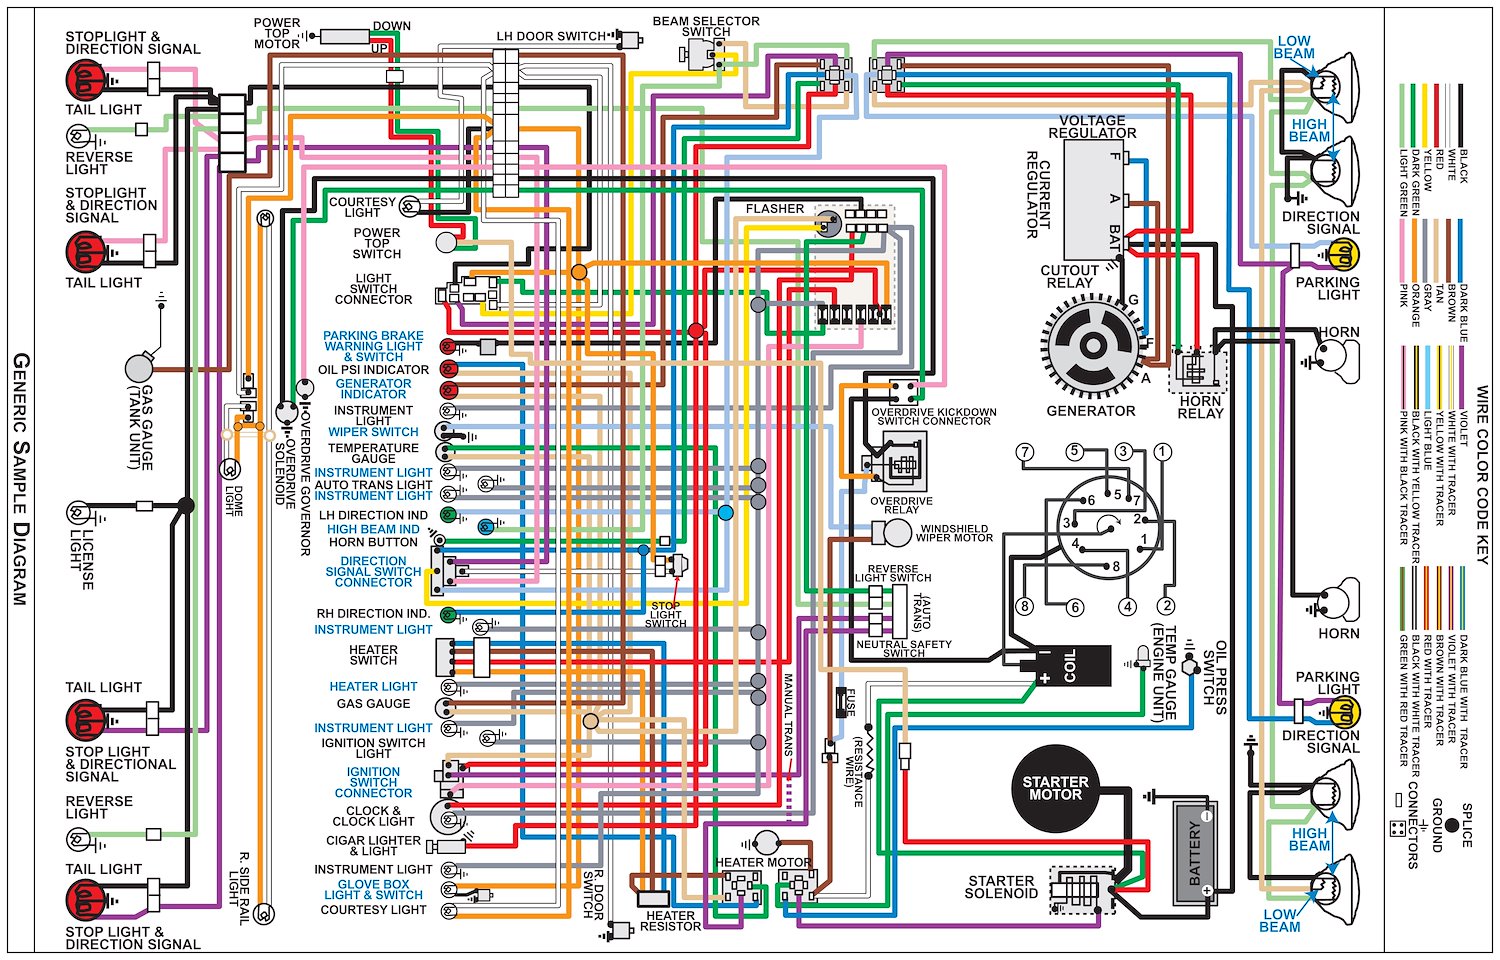 Wiring Diagram for 1957 Dodge Car, 11 in x 17 in., Laminated